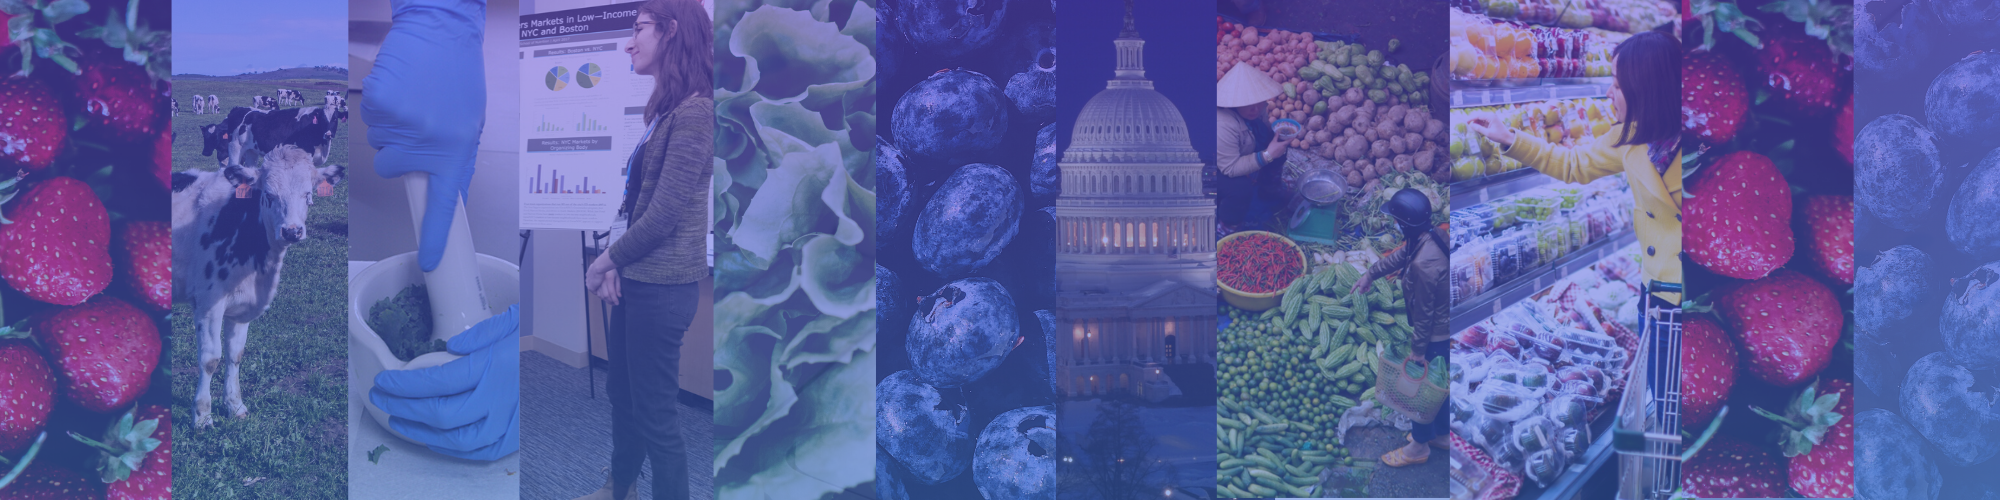 A photo collage with a blue overlay depicting events, healthy foods, and the capitol building in DC